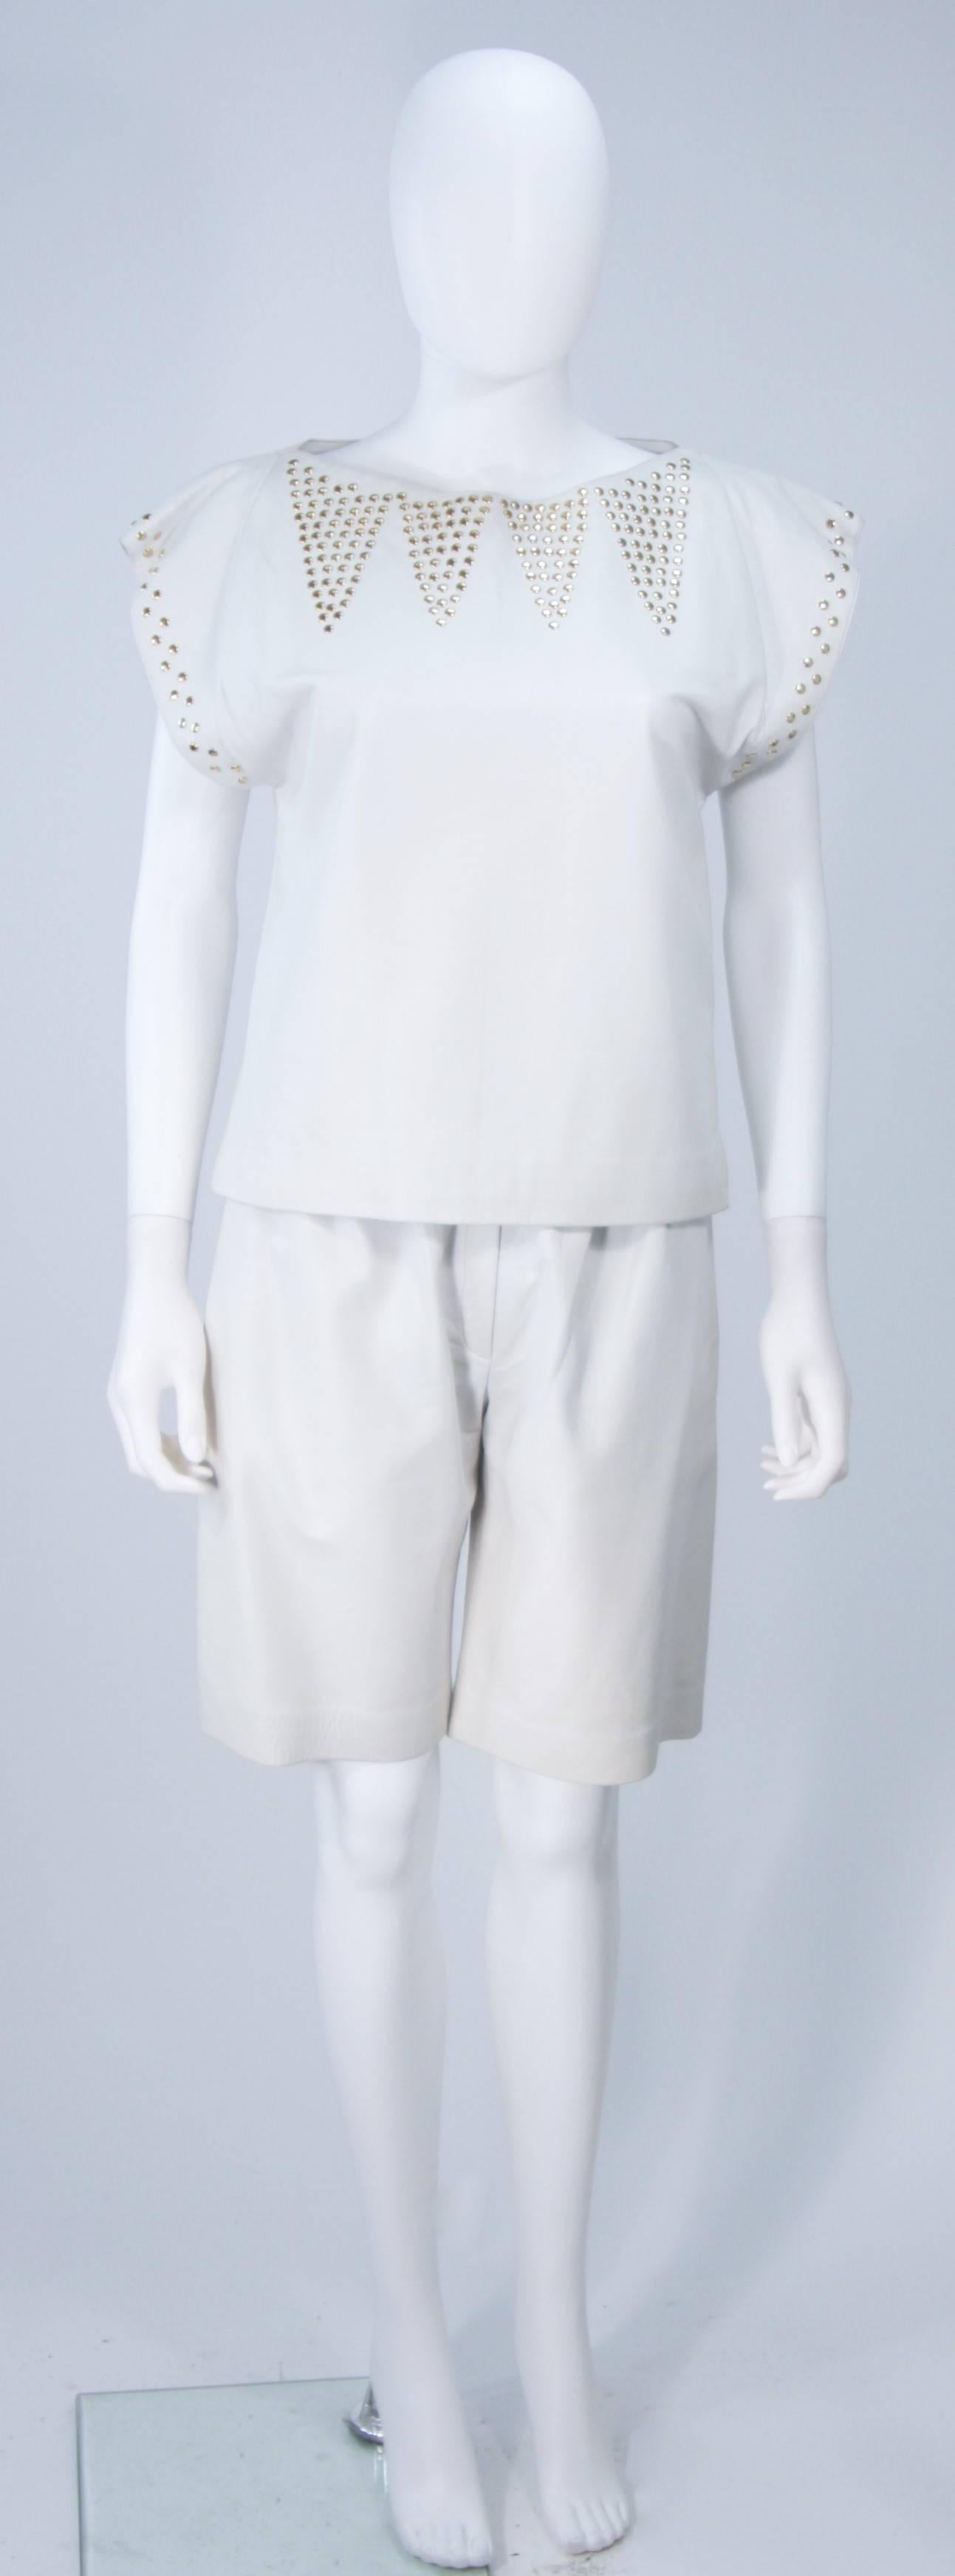  This Ted Lapidus short set is composed of an off white leather with gold studs. The blouse is a pull over style. The shorts feature a pleated front, side pockets, and zipper closure. In excellent vintage condition.

**Please cross-reference